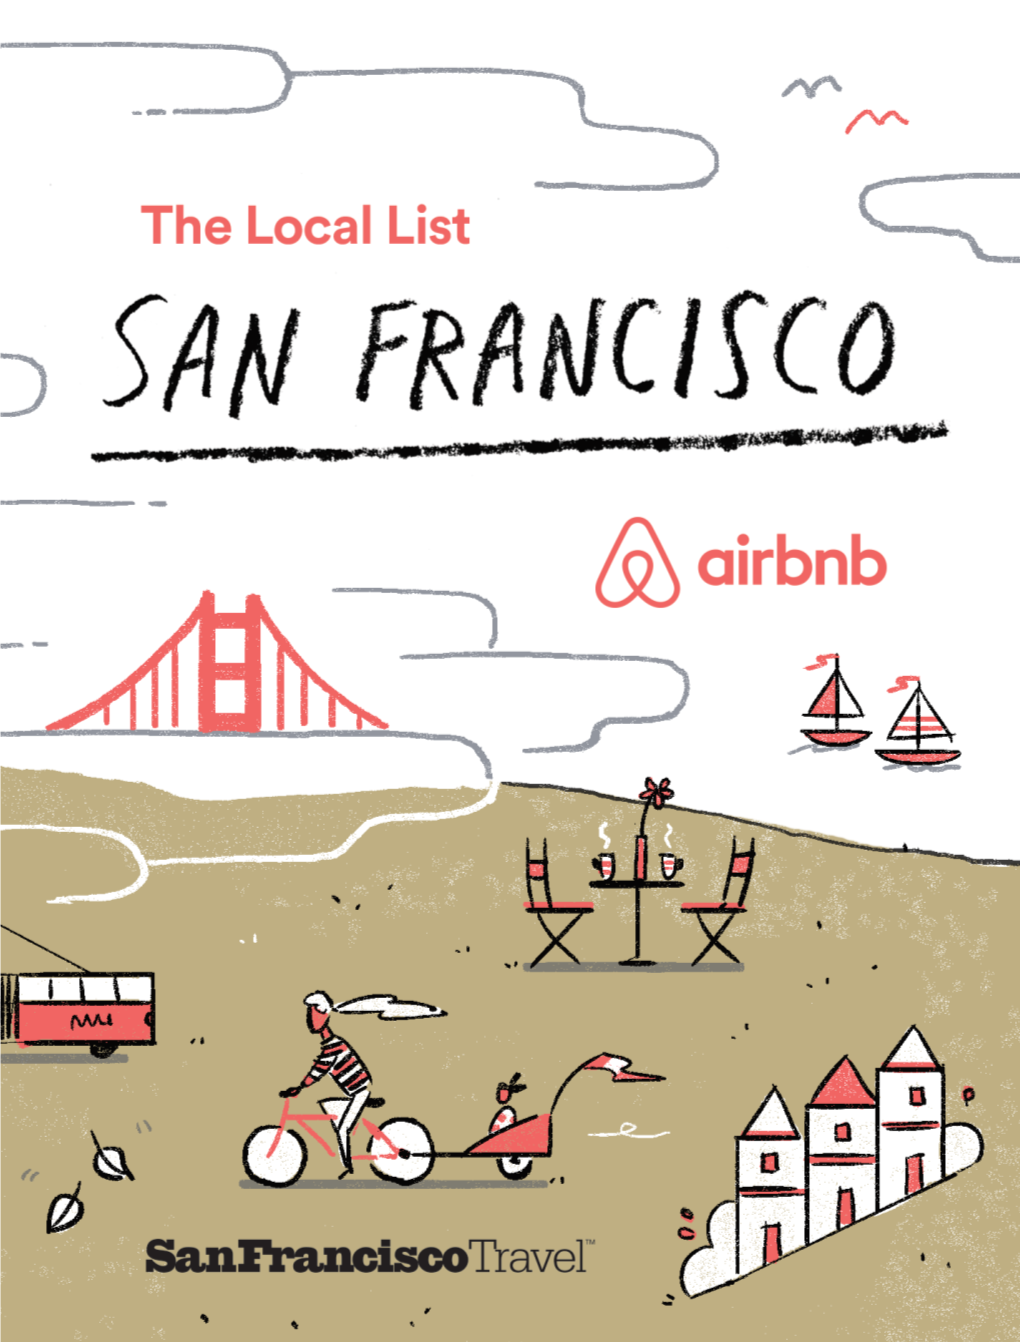 Download a Copy of the San Francisco Local List